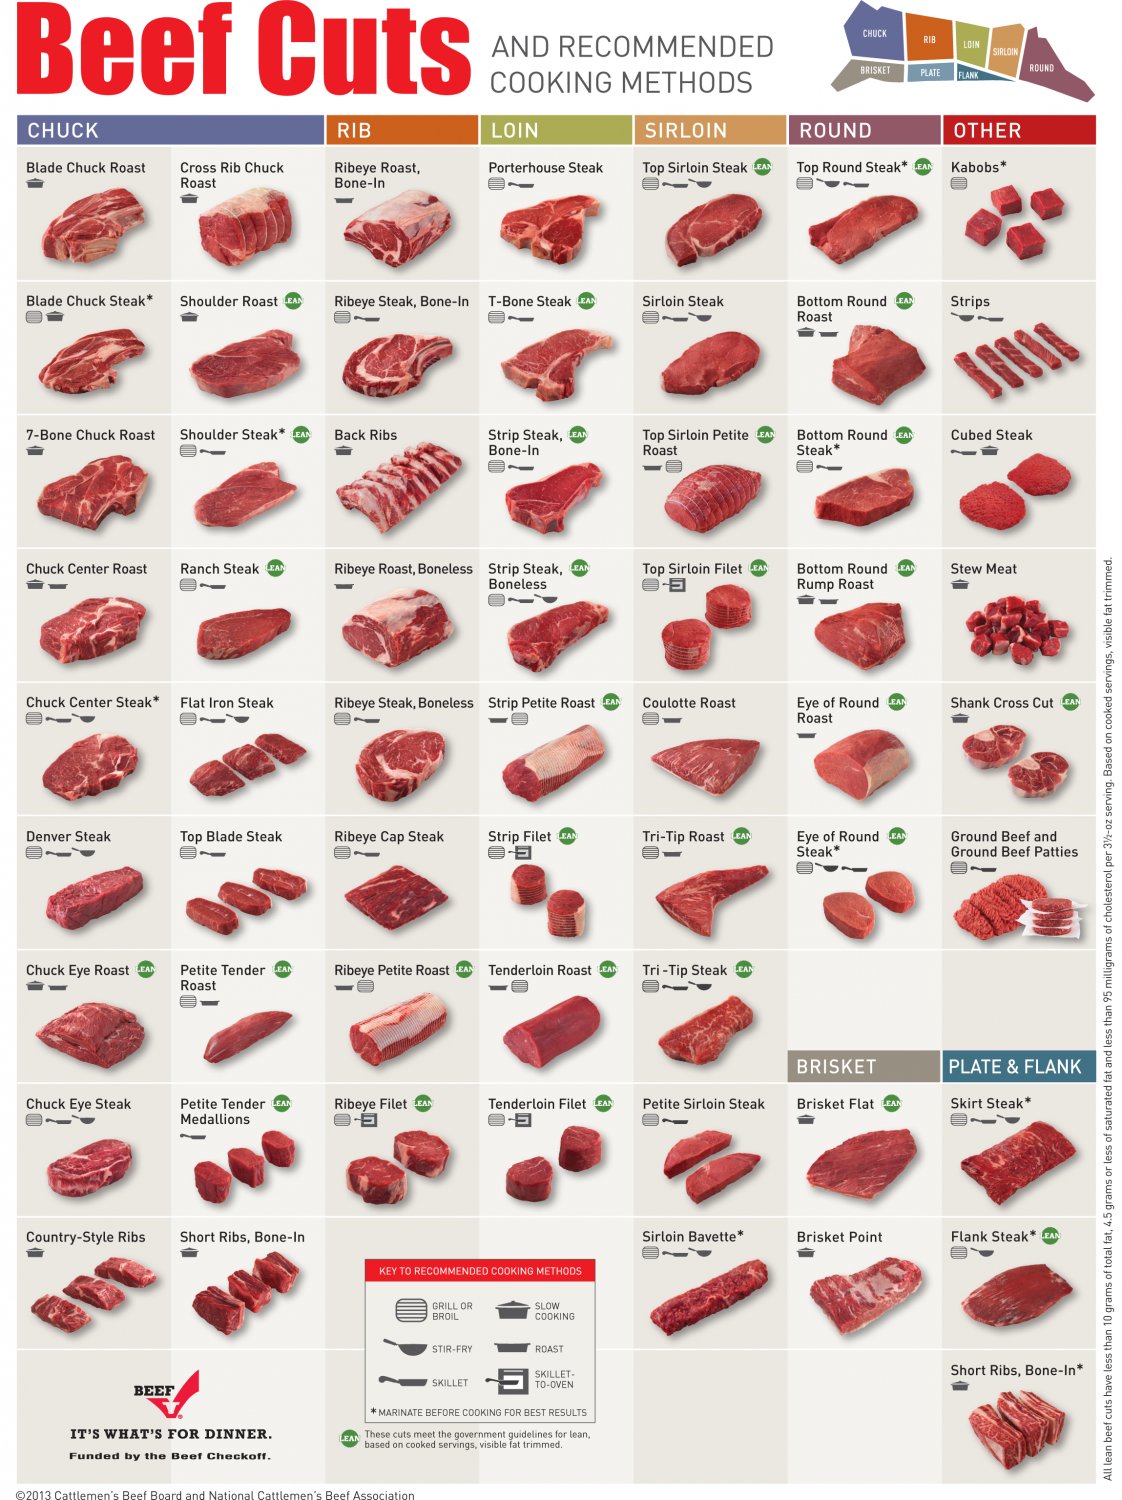 Beef Cuts Recommended Cooking Methods Chart 18"x28" (45cm/70cm) Poster